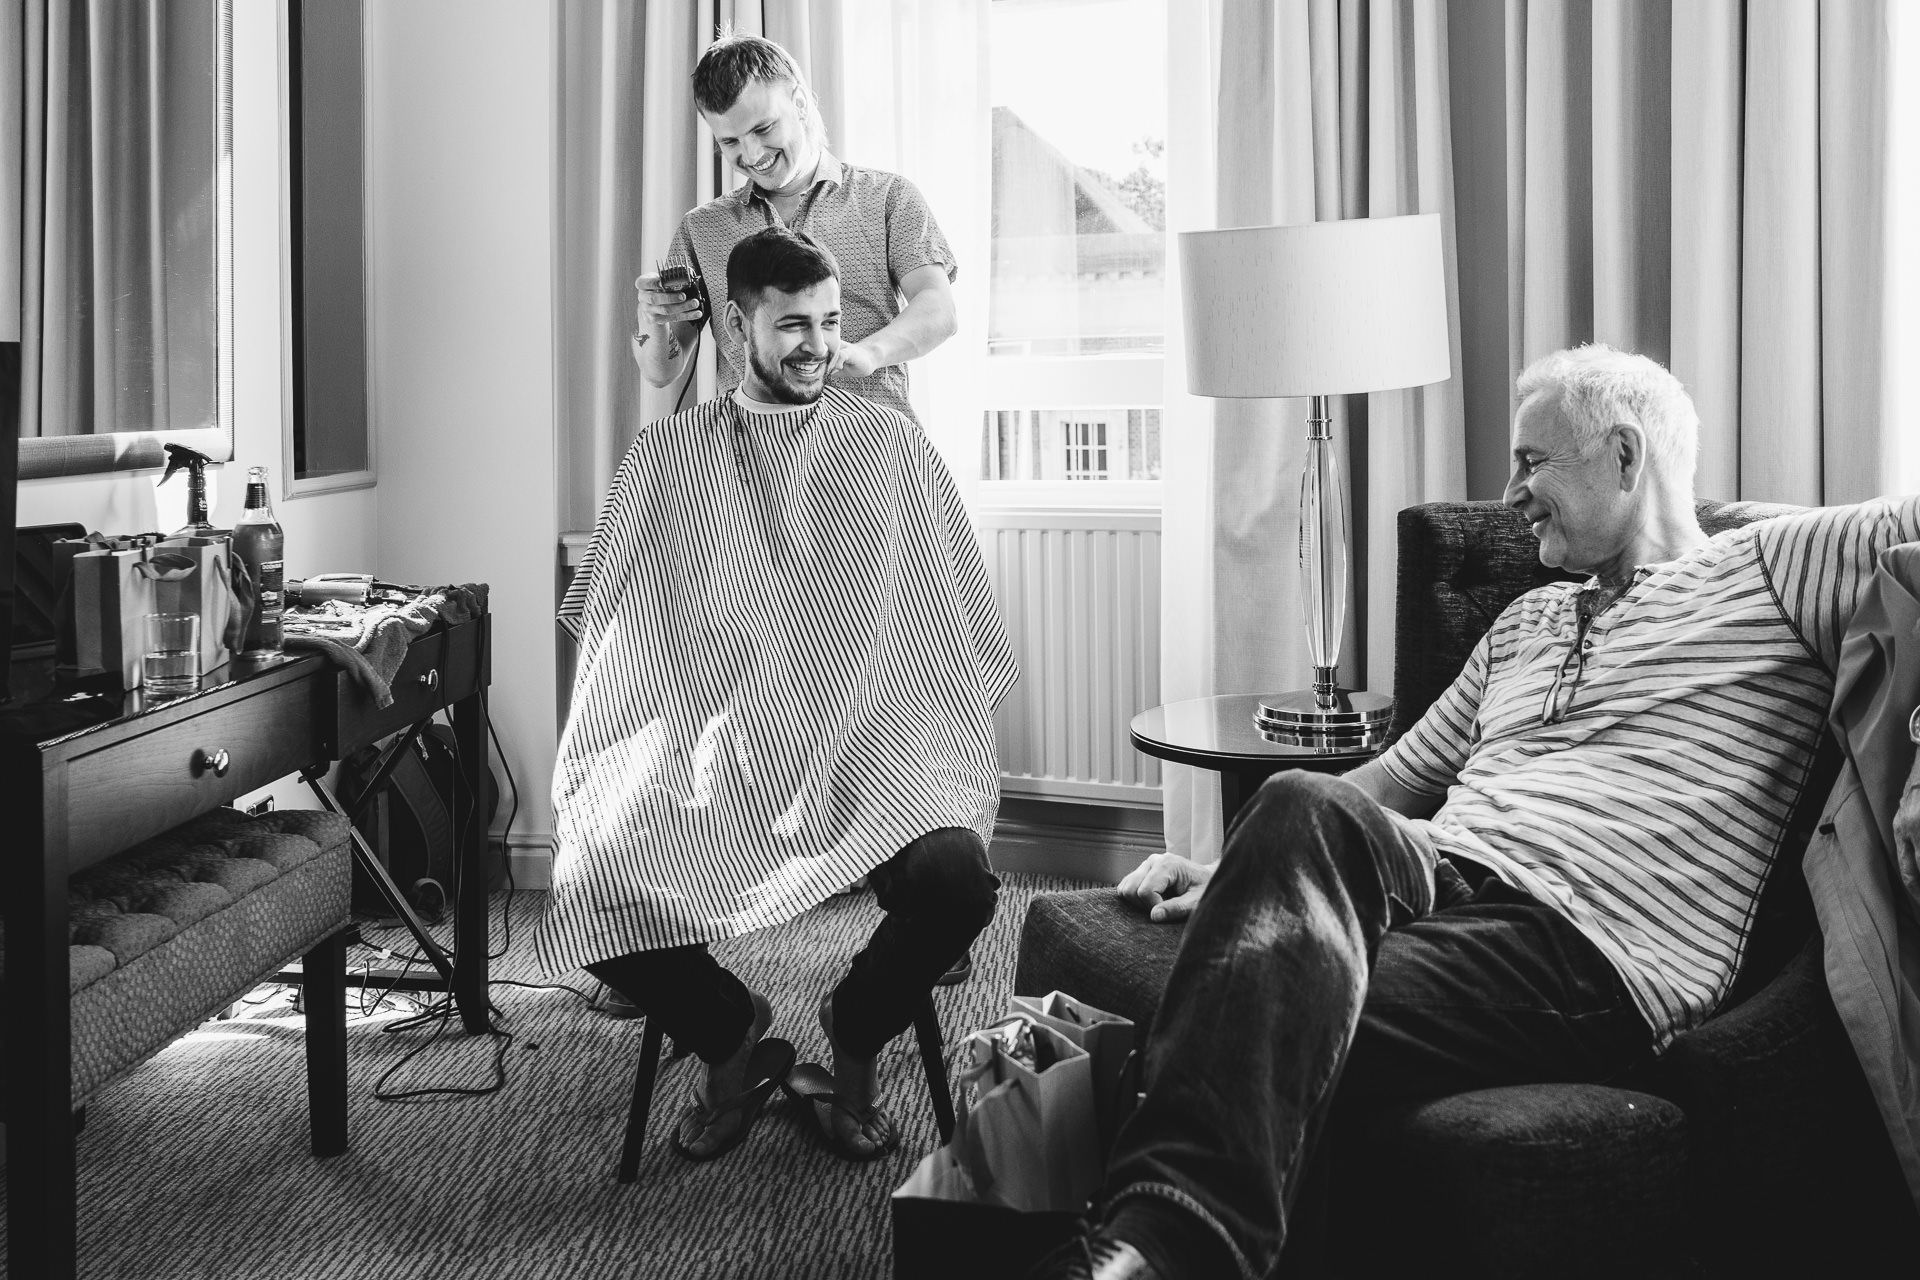 Groom having his hair cut and laughing with his father